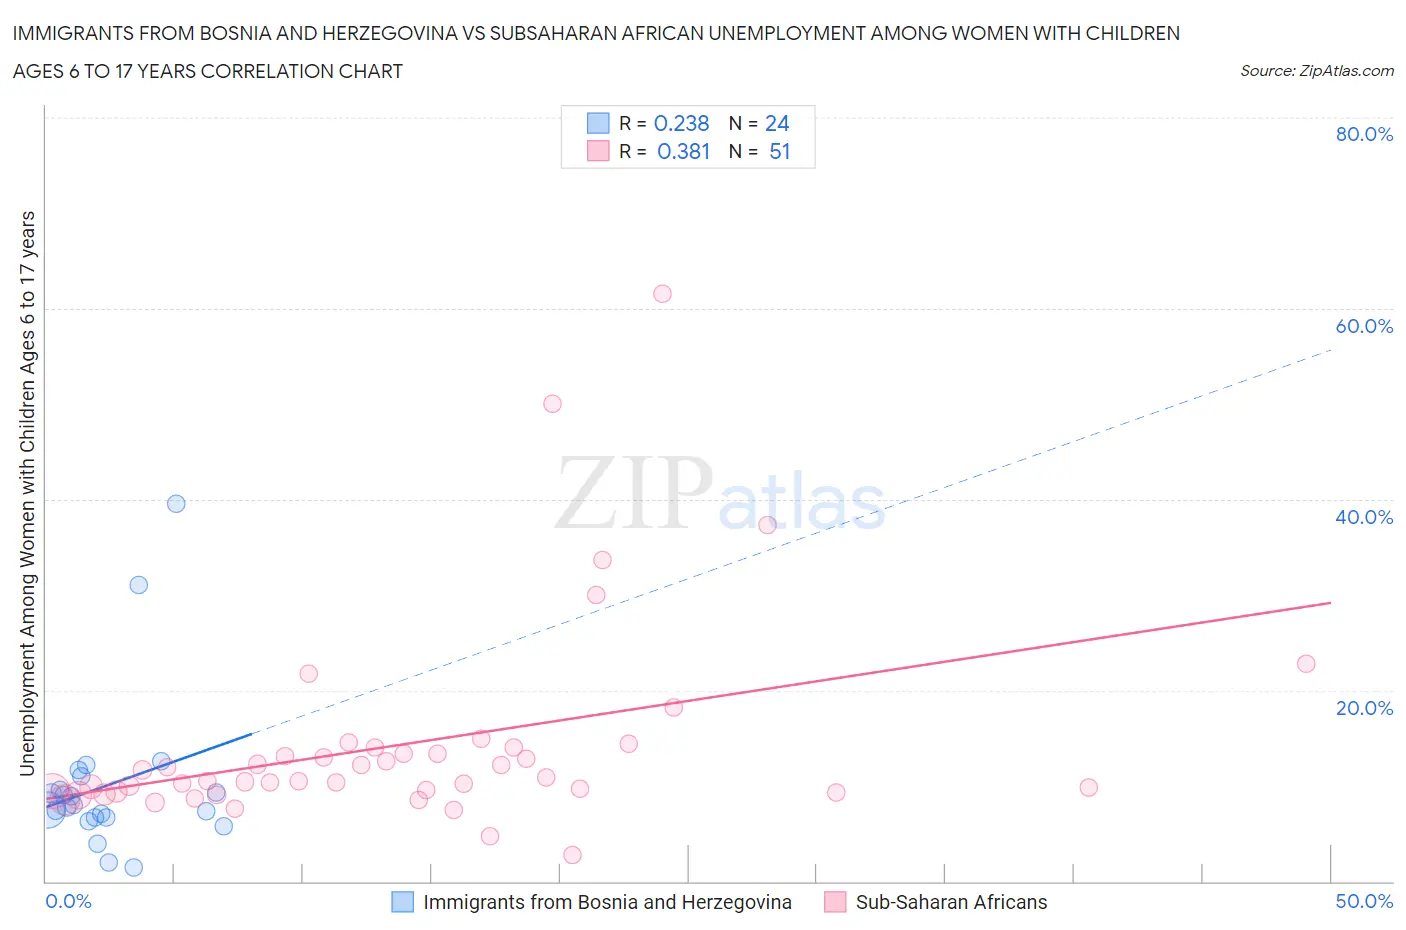 Immigrants from Bosnia and Herzegovina vs Subsaharan African Unemployment Among Women with Children Ages 6 to 17 years